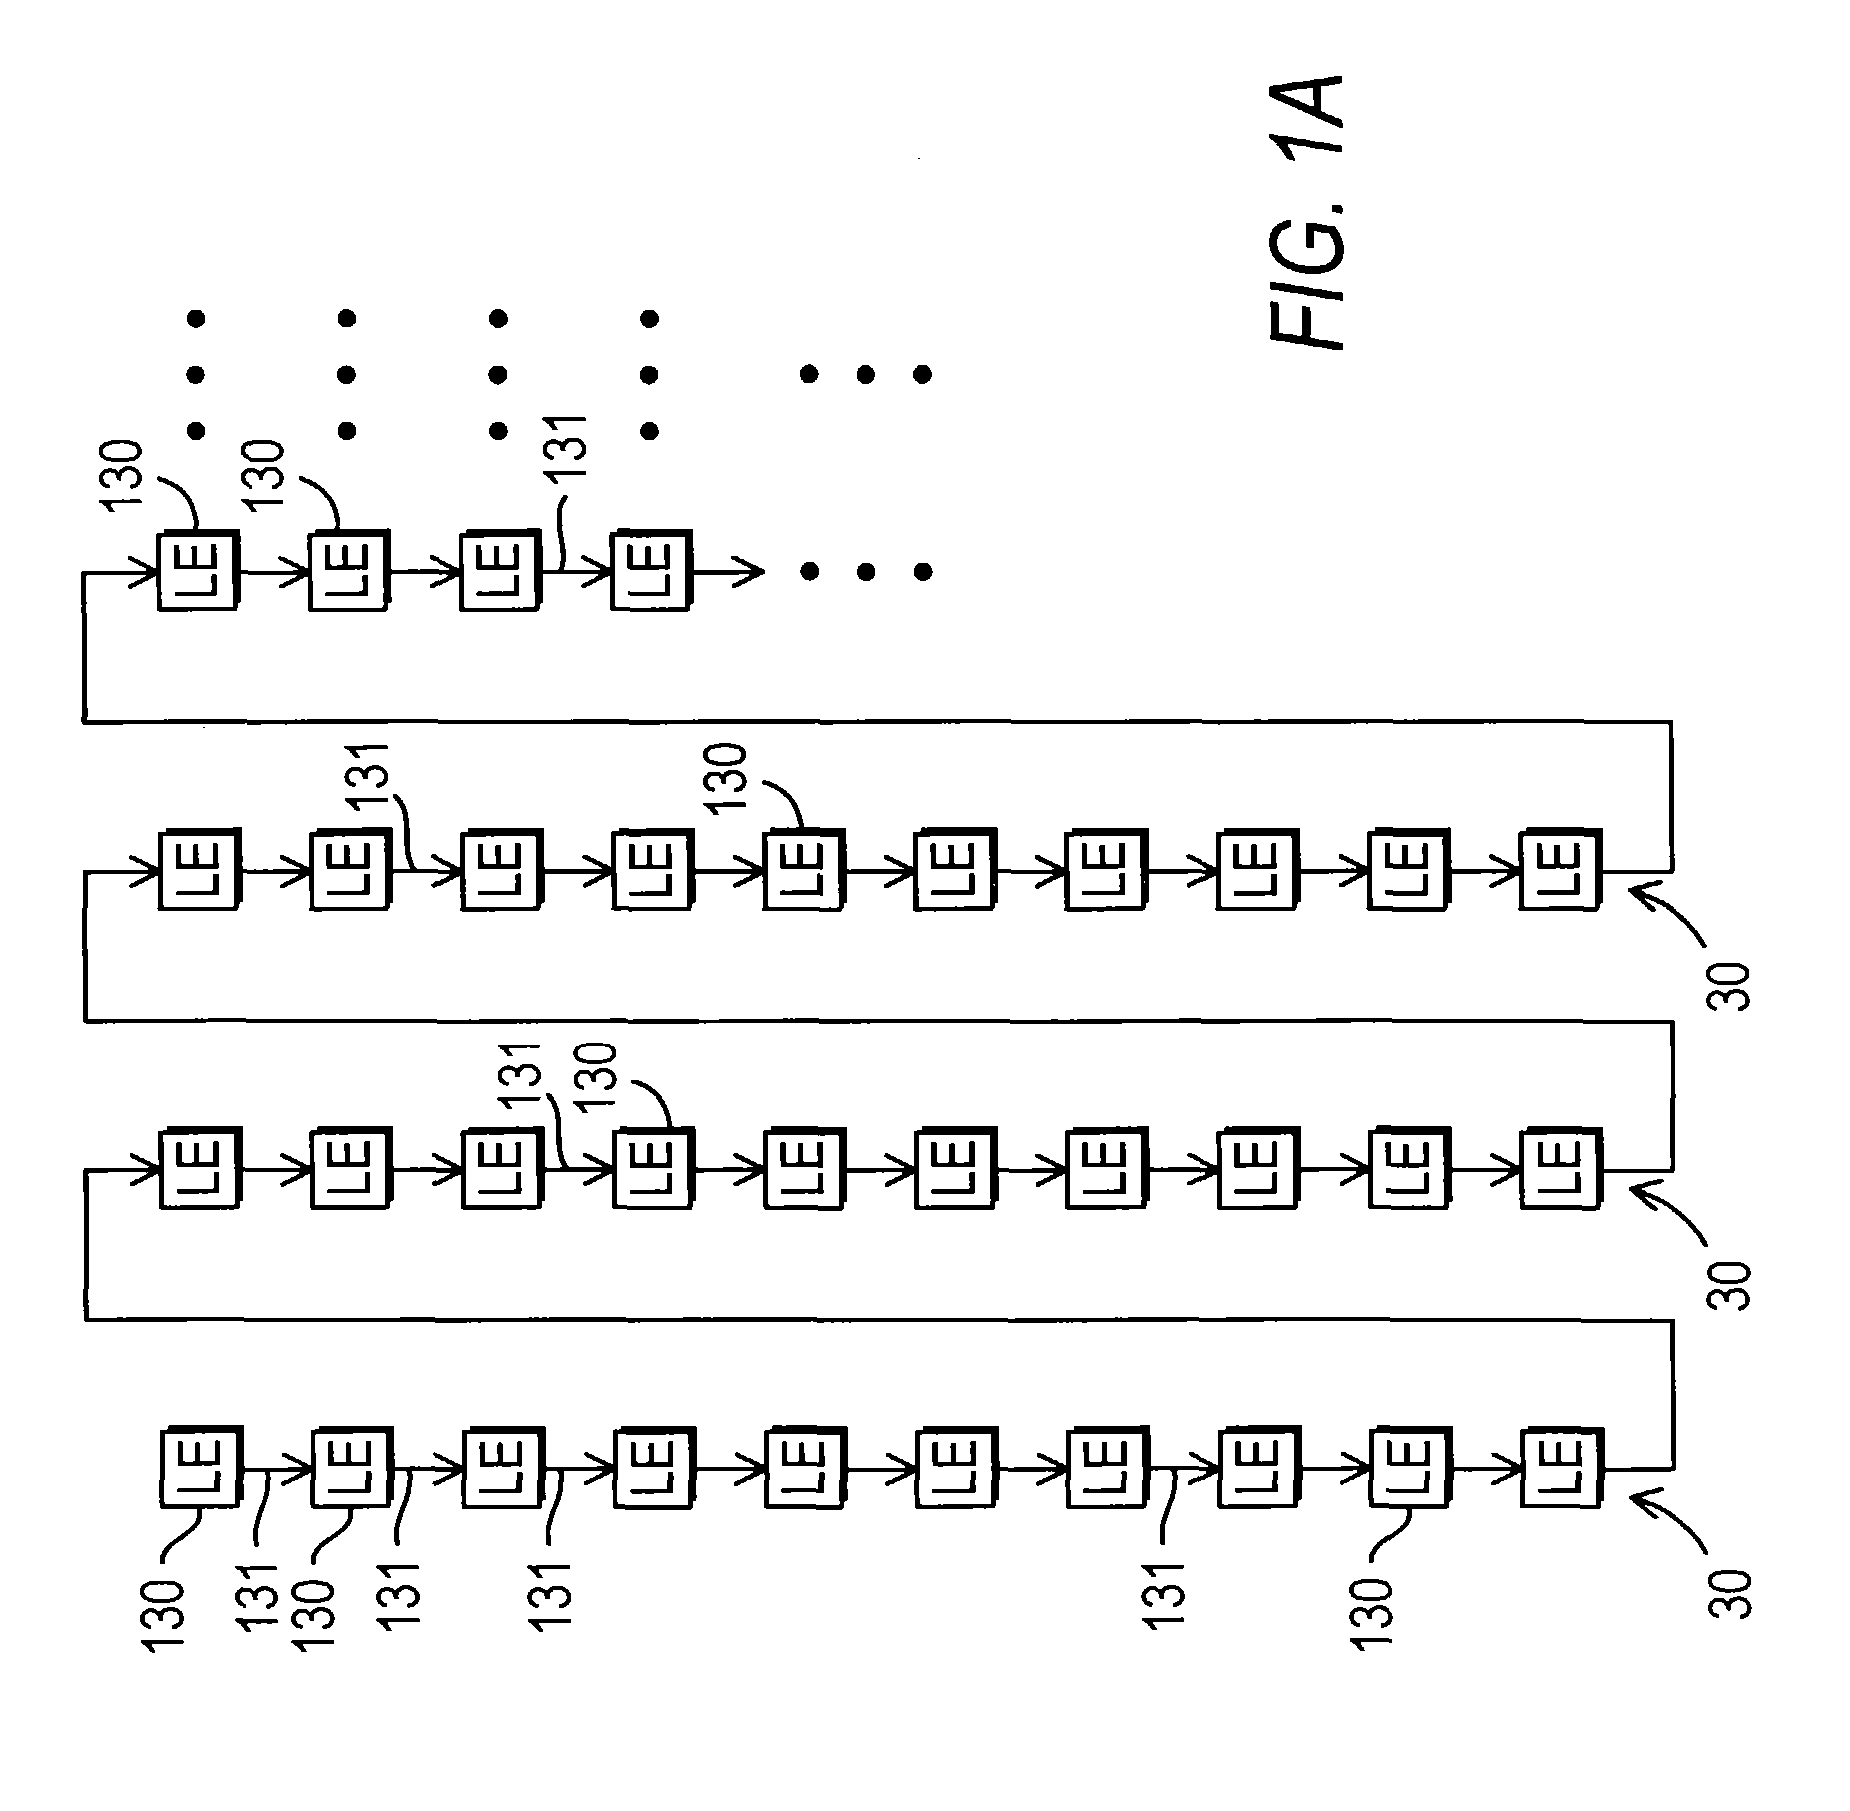 Circuitry for arithmetically accumulating a succession of arithmetic values